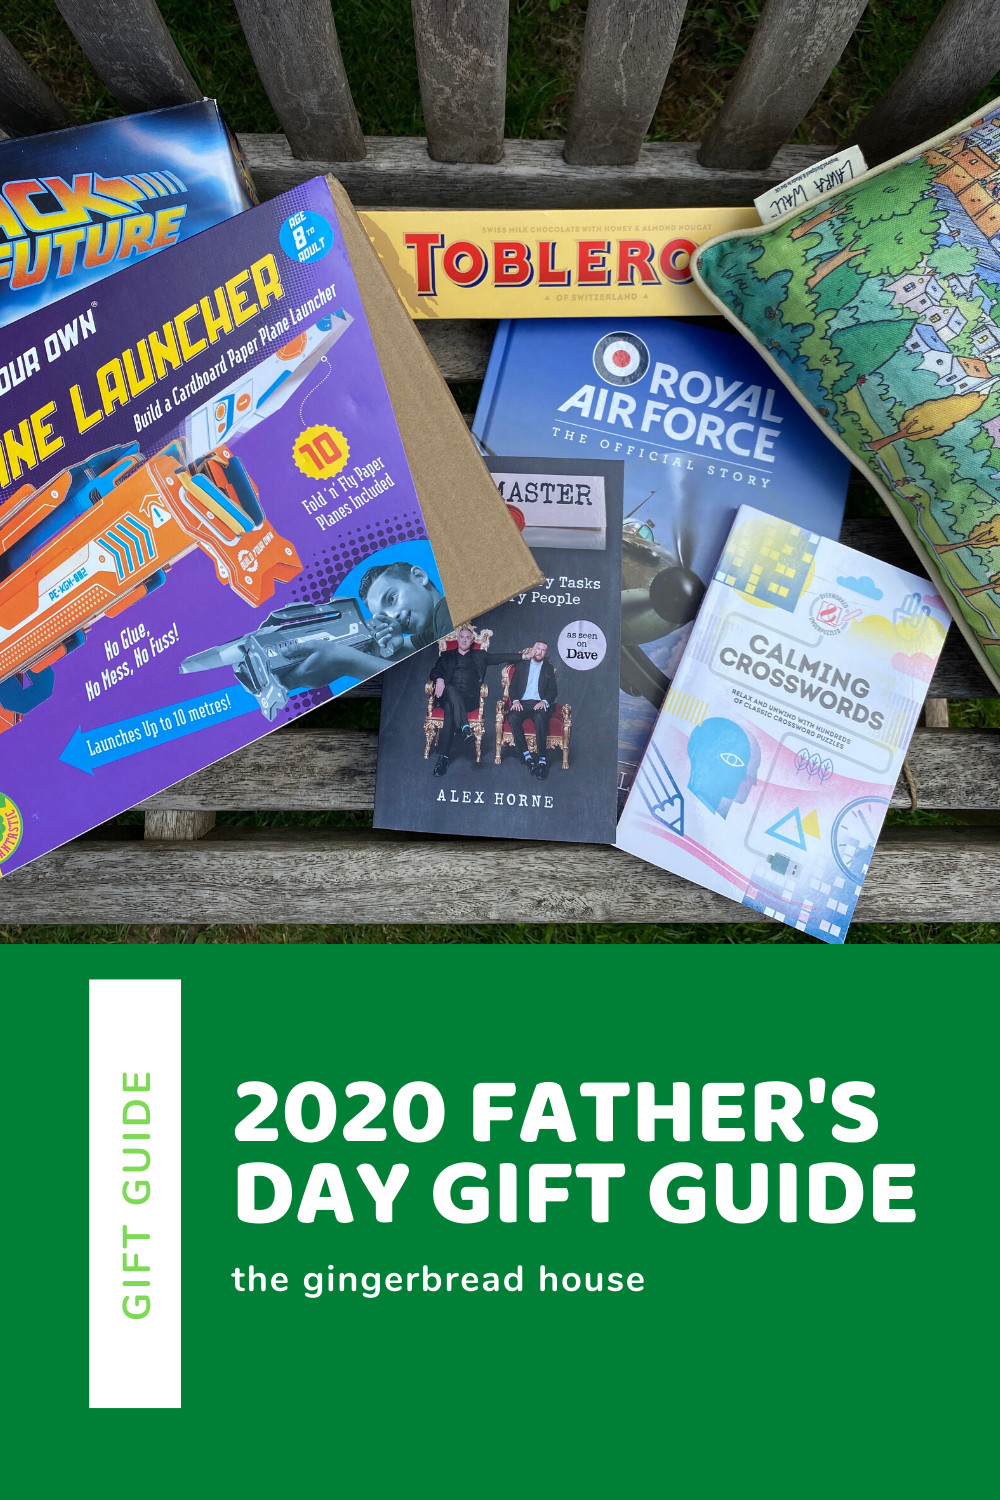 Gift Guide 2020 Kids
 2020 Father’s Day t guide the gingerbread house